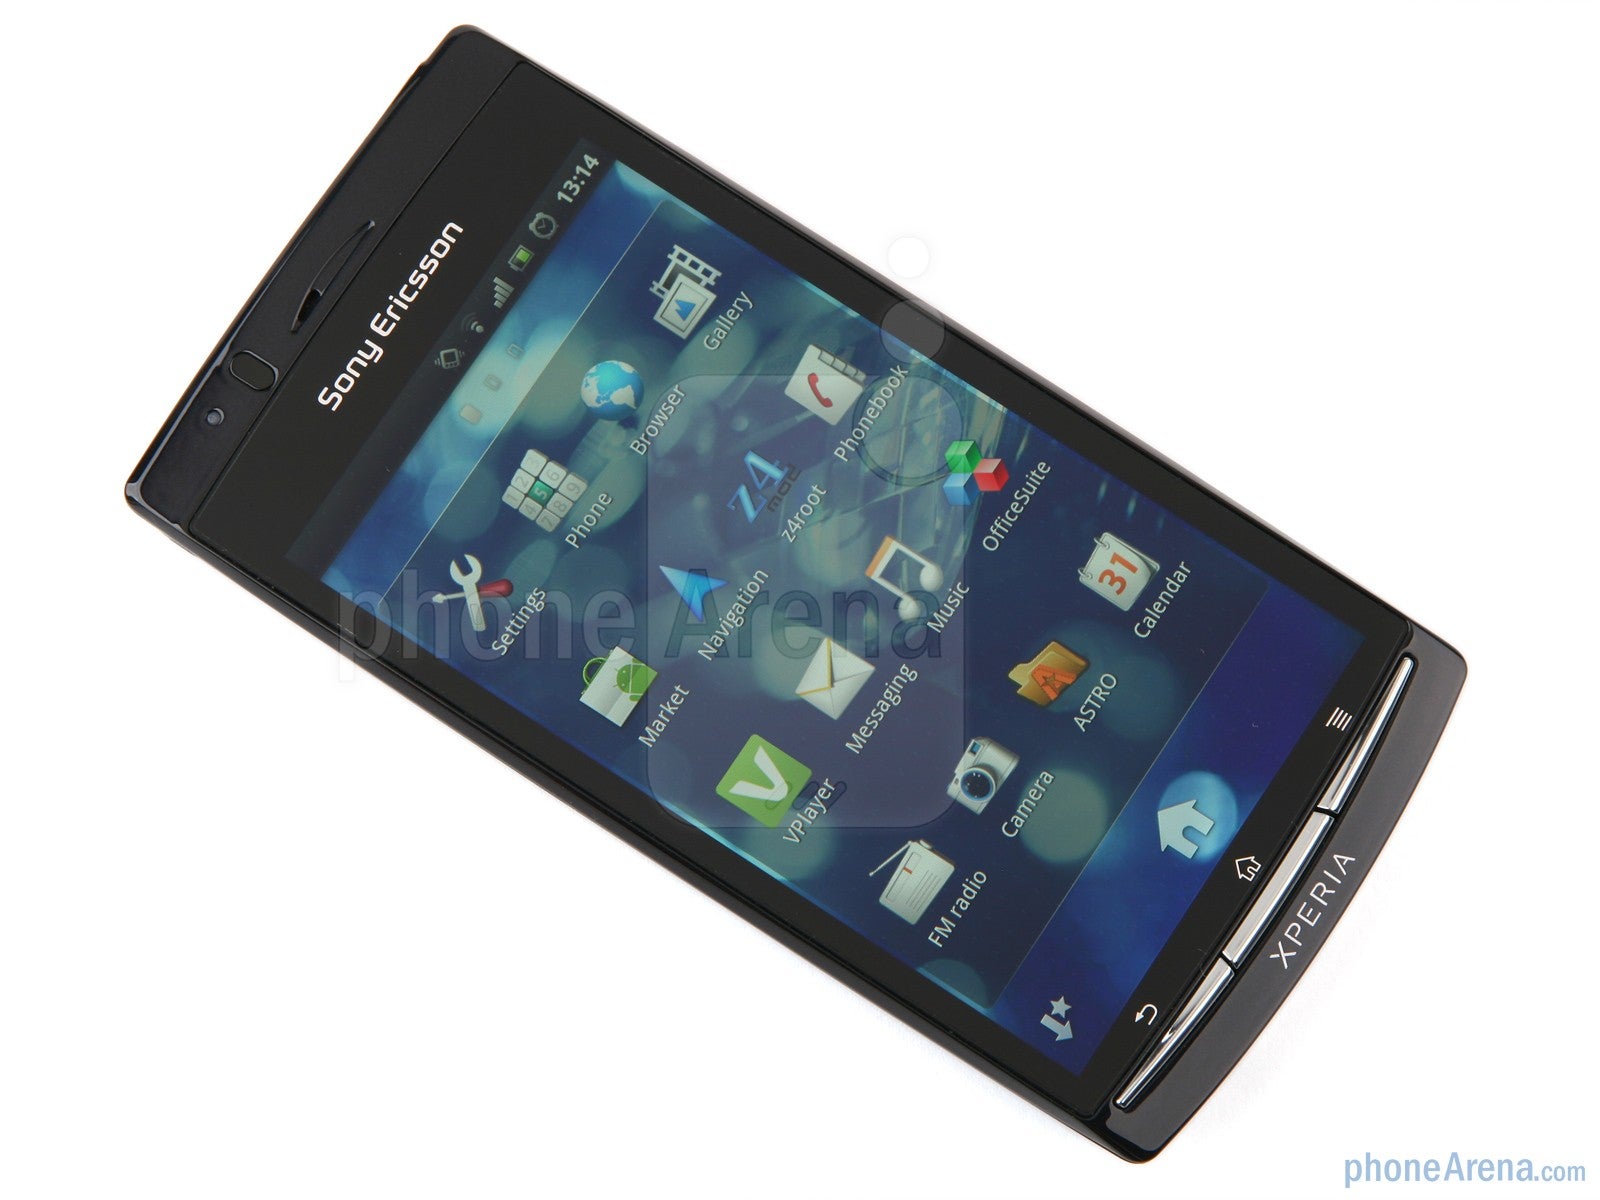 The 4.2&rdquo; Reality Display of the Xperia arc S - Sony Ericsson Xperia arc S Review